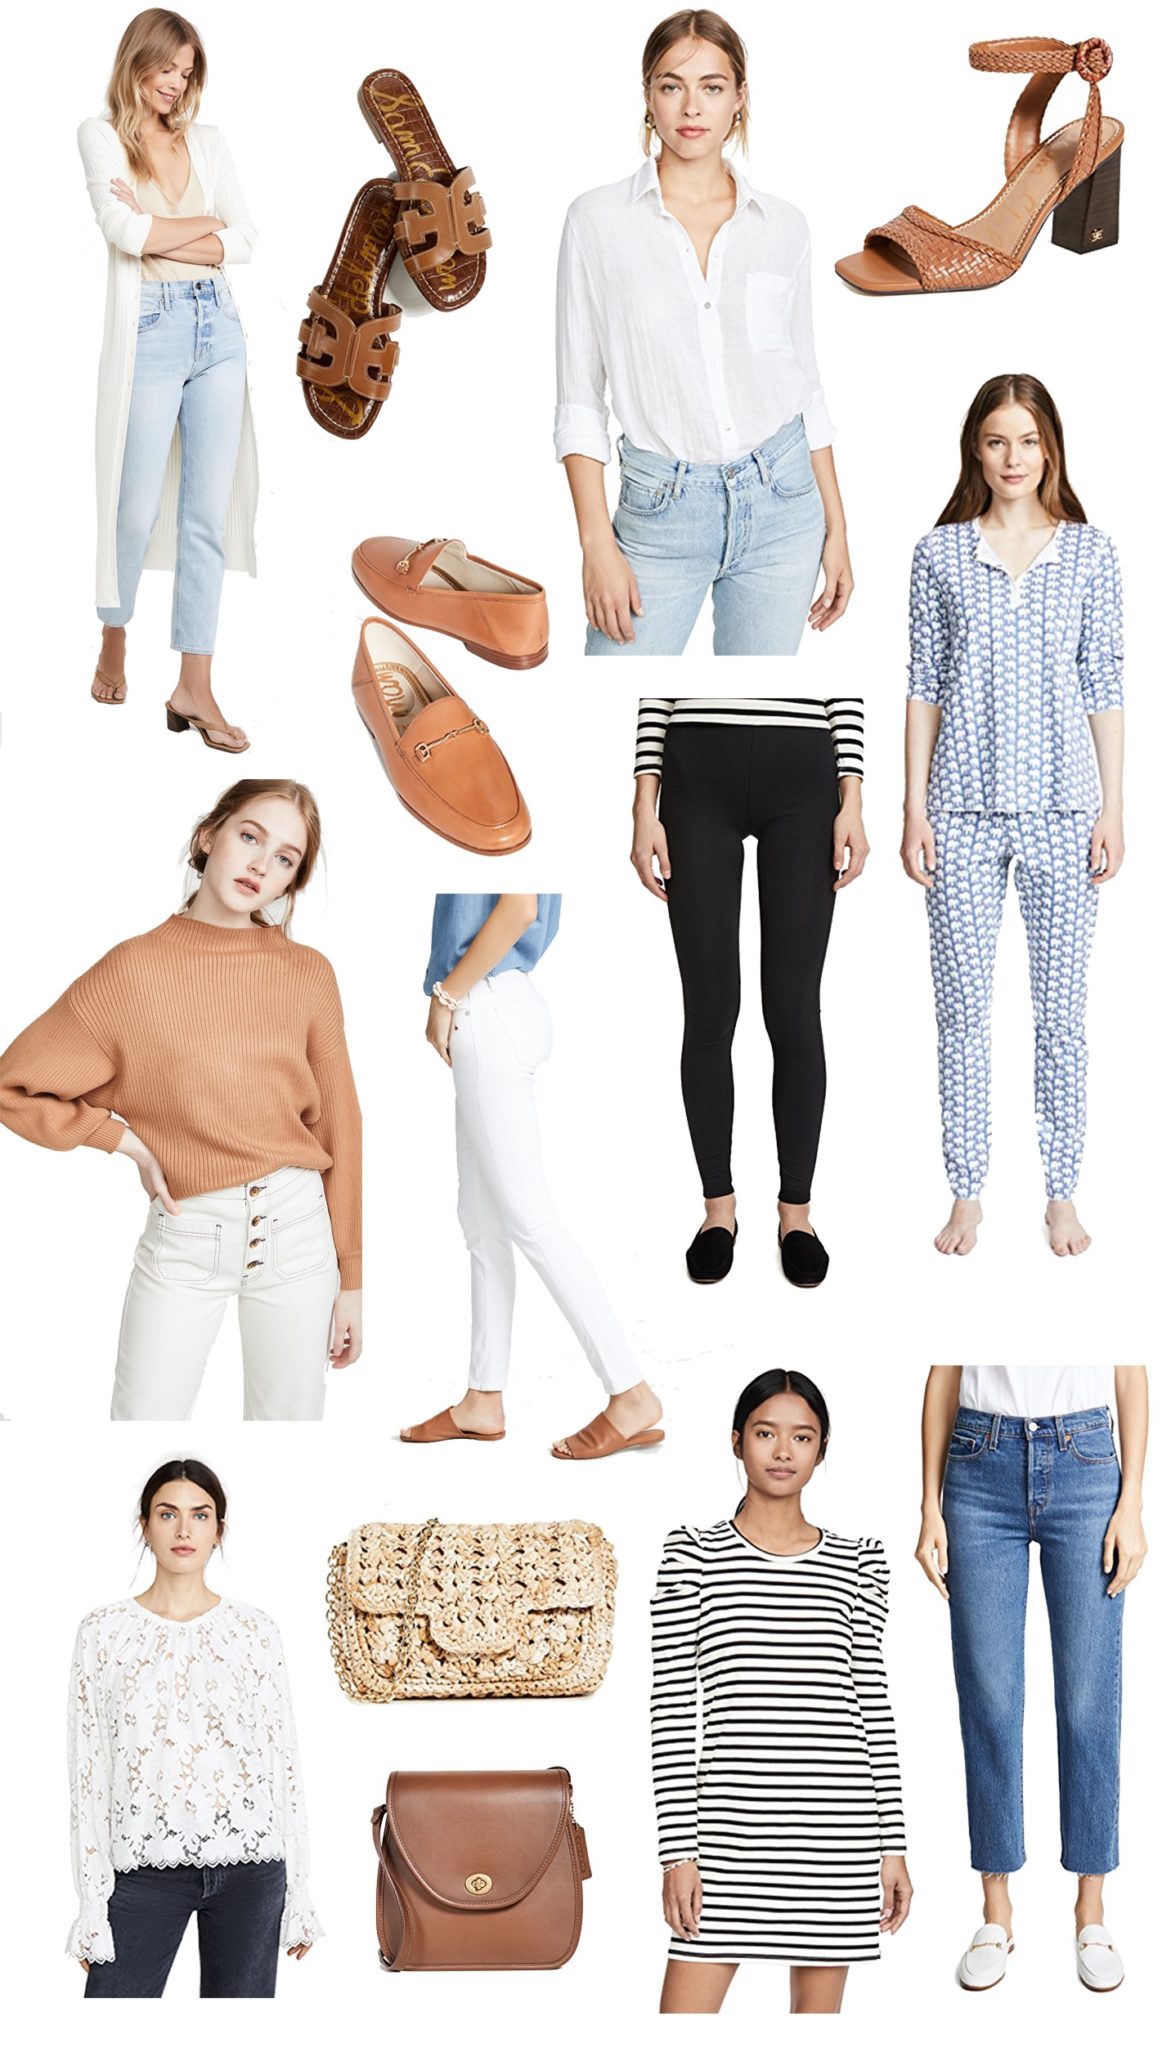 25 Shopbop Sale Favorites - Kelly in the City | Lifestyle Blog